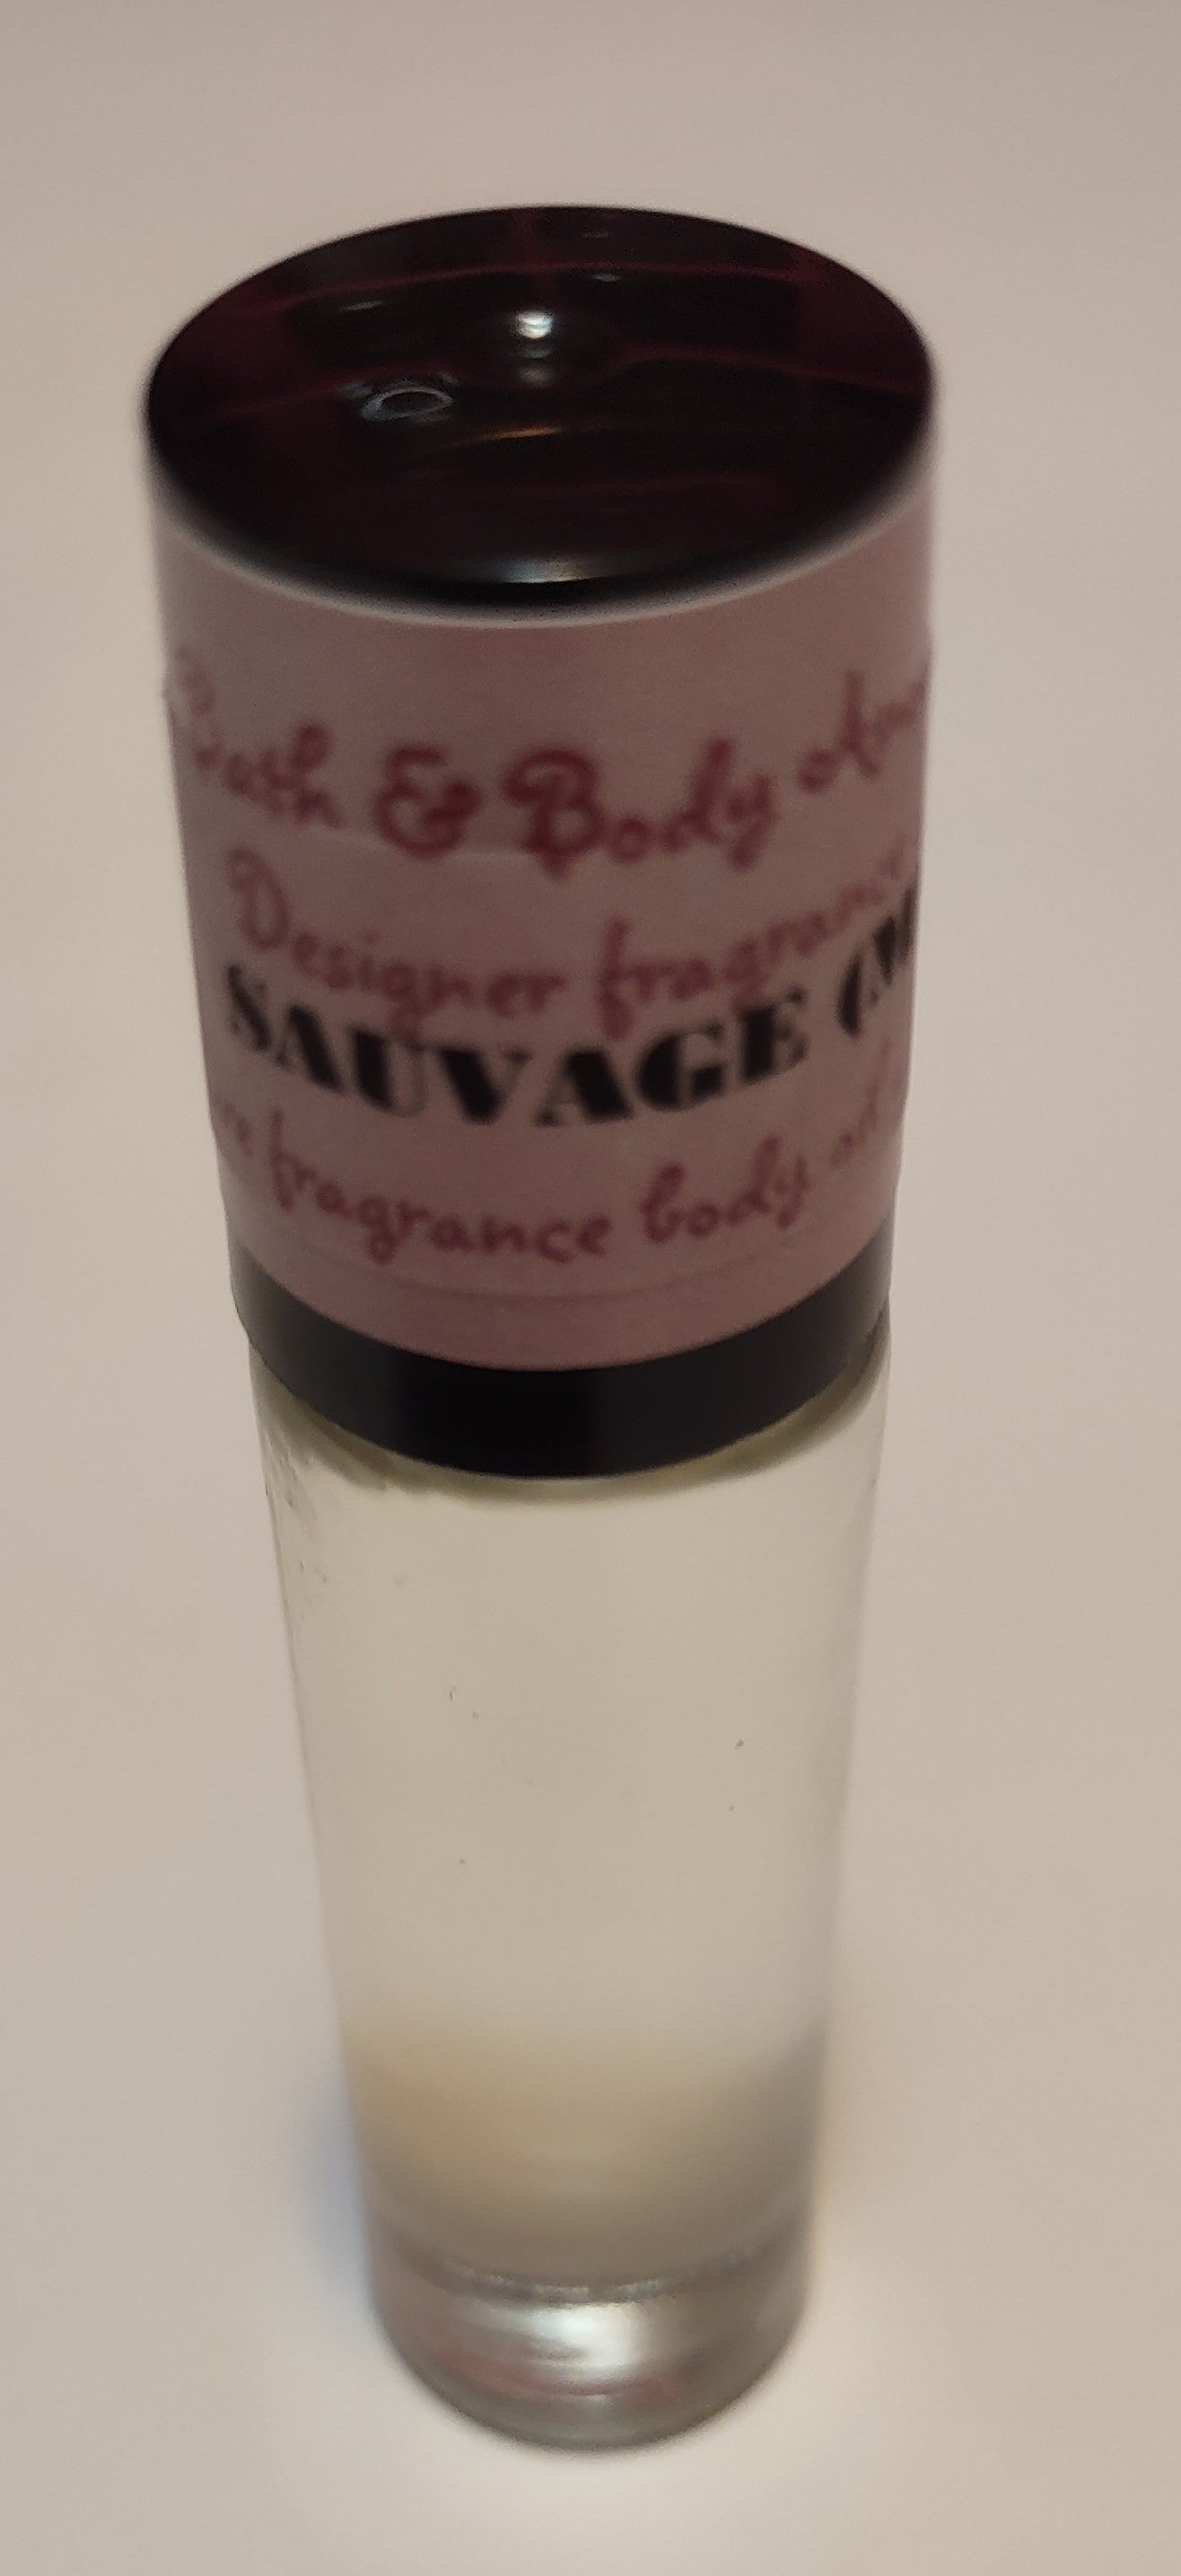 Sauvage for Men - our impression.